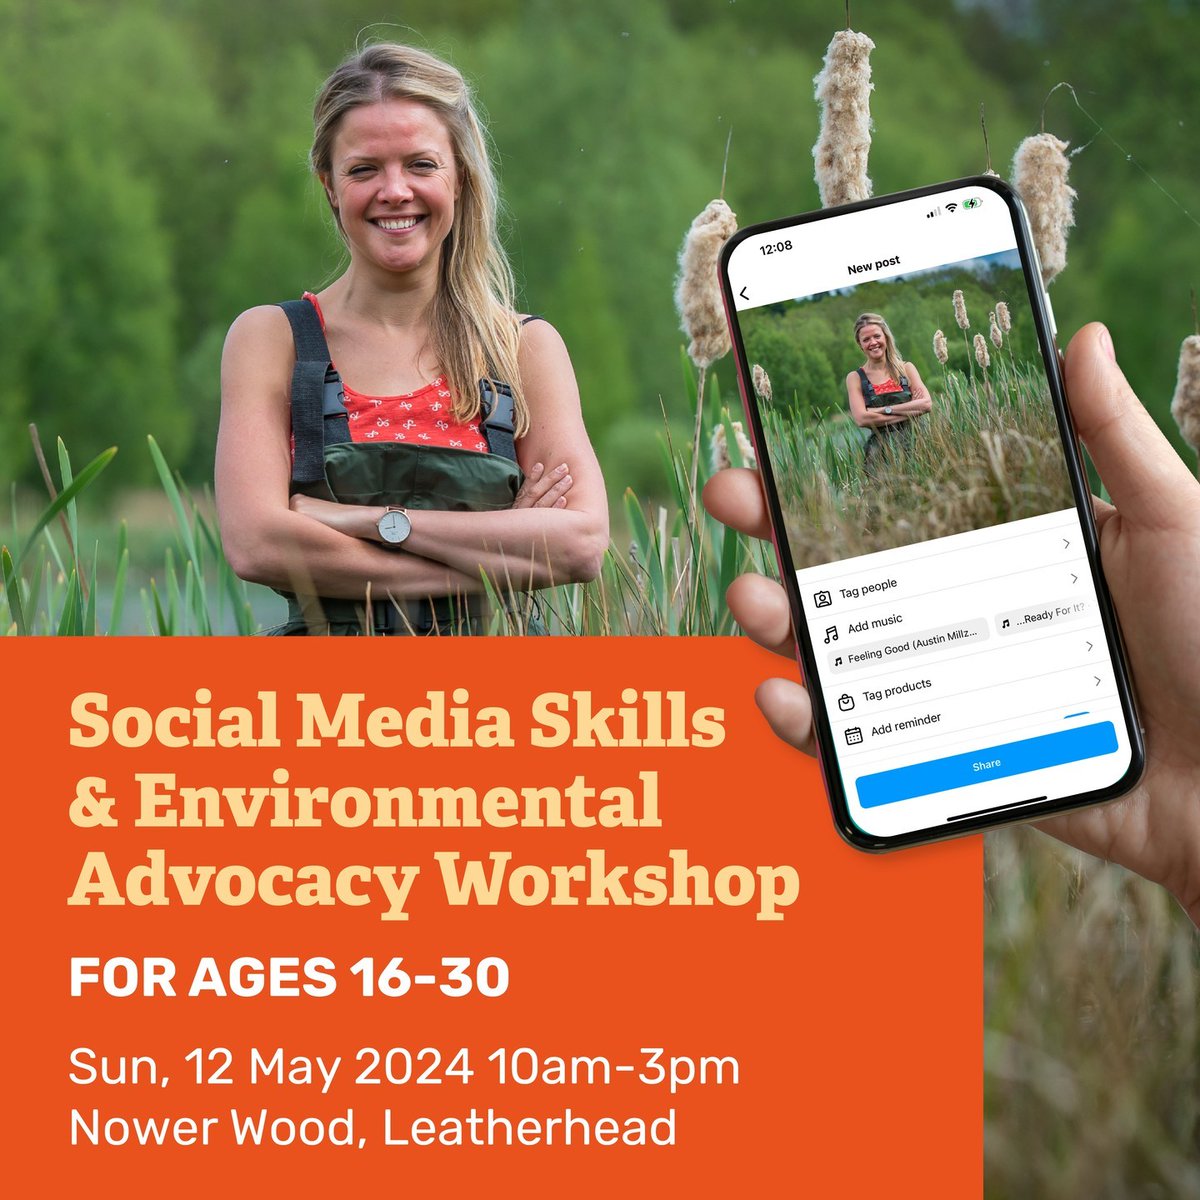 Aged 16-30? Join us for a Social Media Skills & Environmental Advocacy workshop at Nower Wood Ancient Woodland on Sunday 12th May. Enjoy talks, workshops & outdoor activities surrounded by spring wildflowers! Tickets just £5. Book a spot ➡️ bit.ly/3TB0mxW